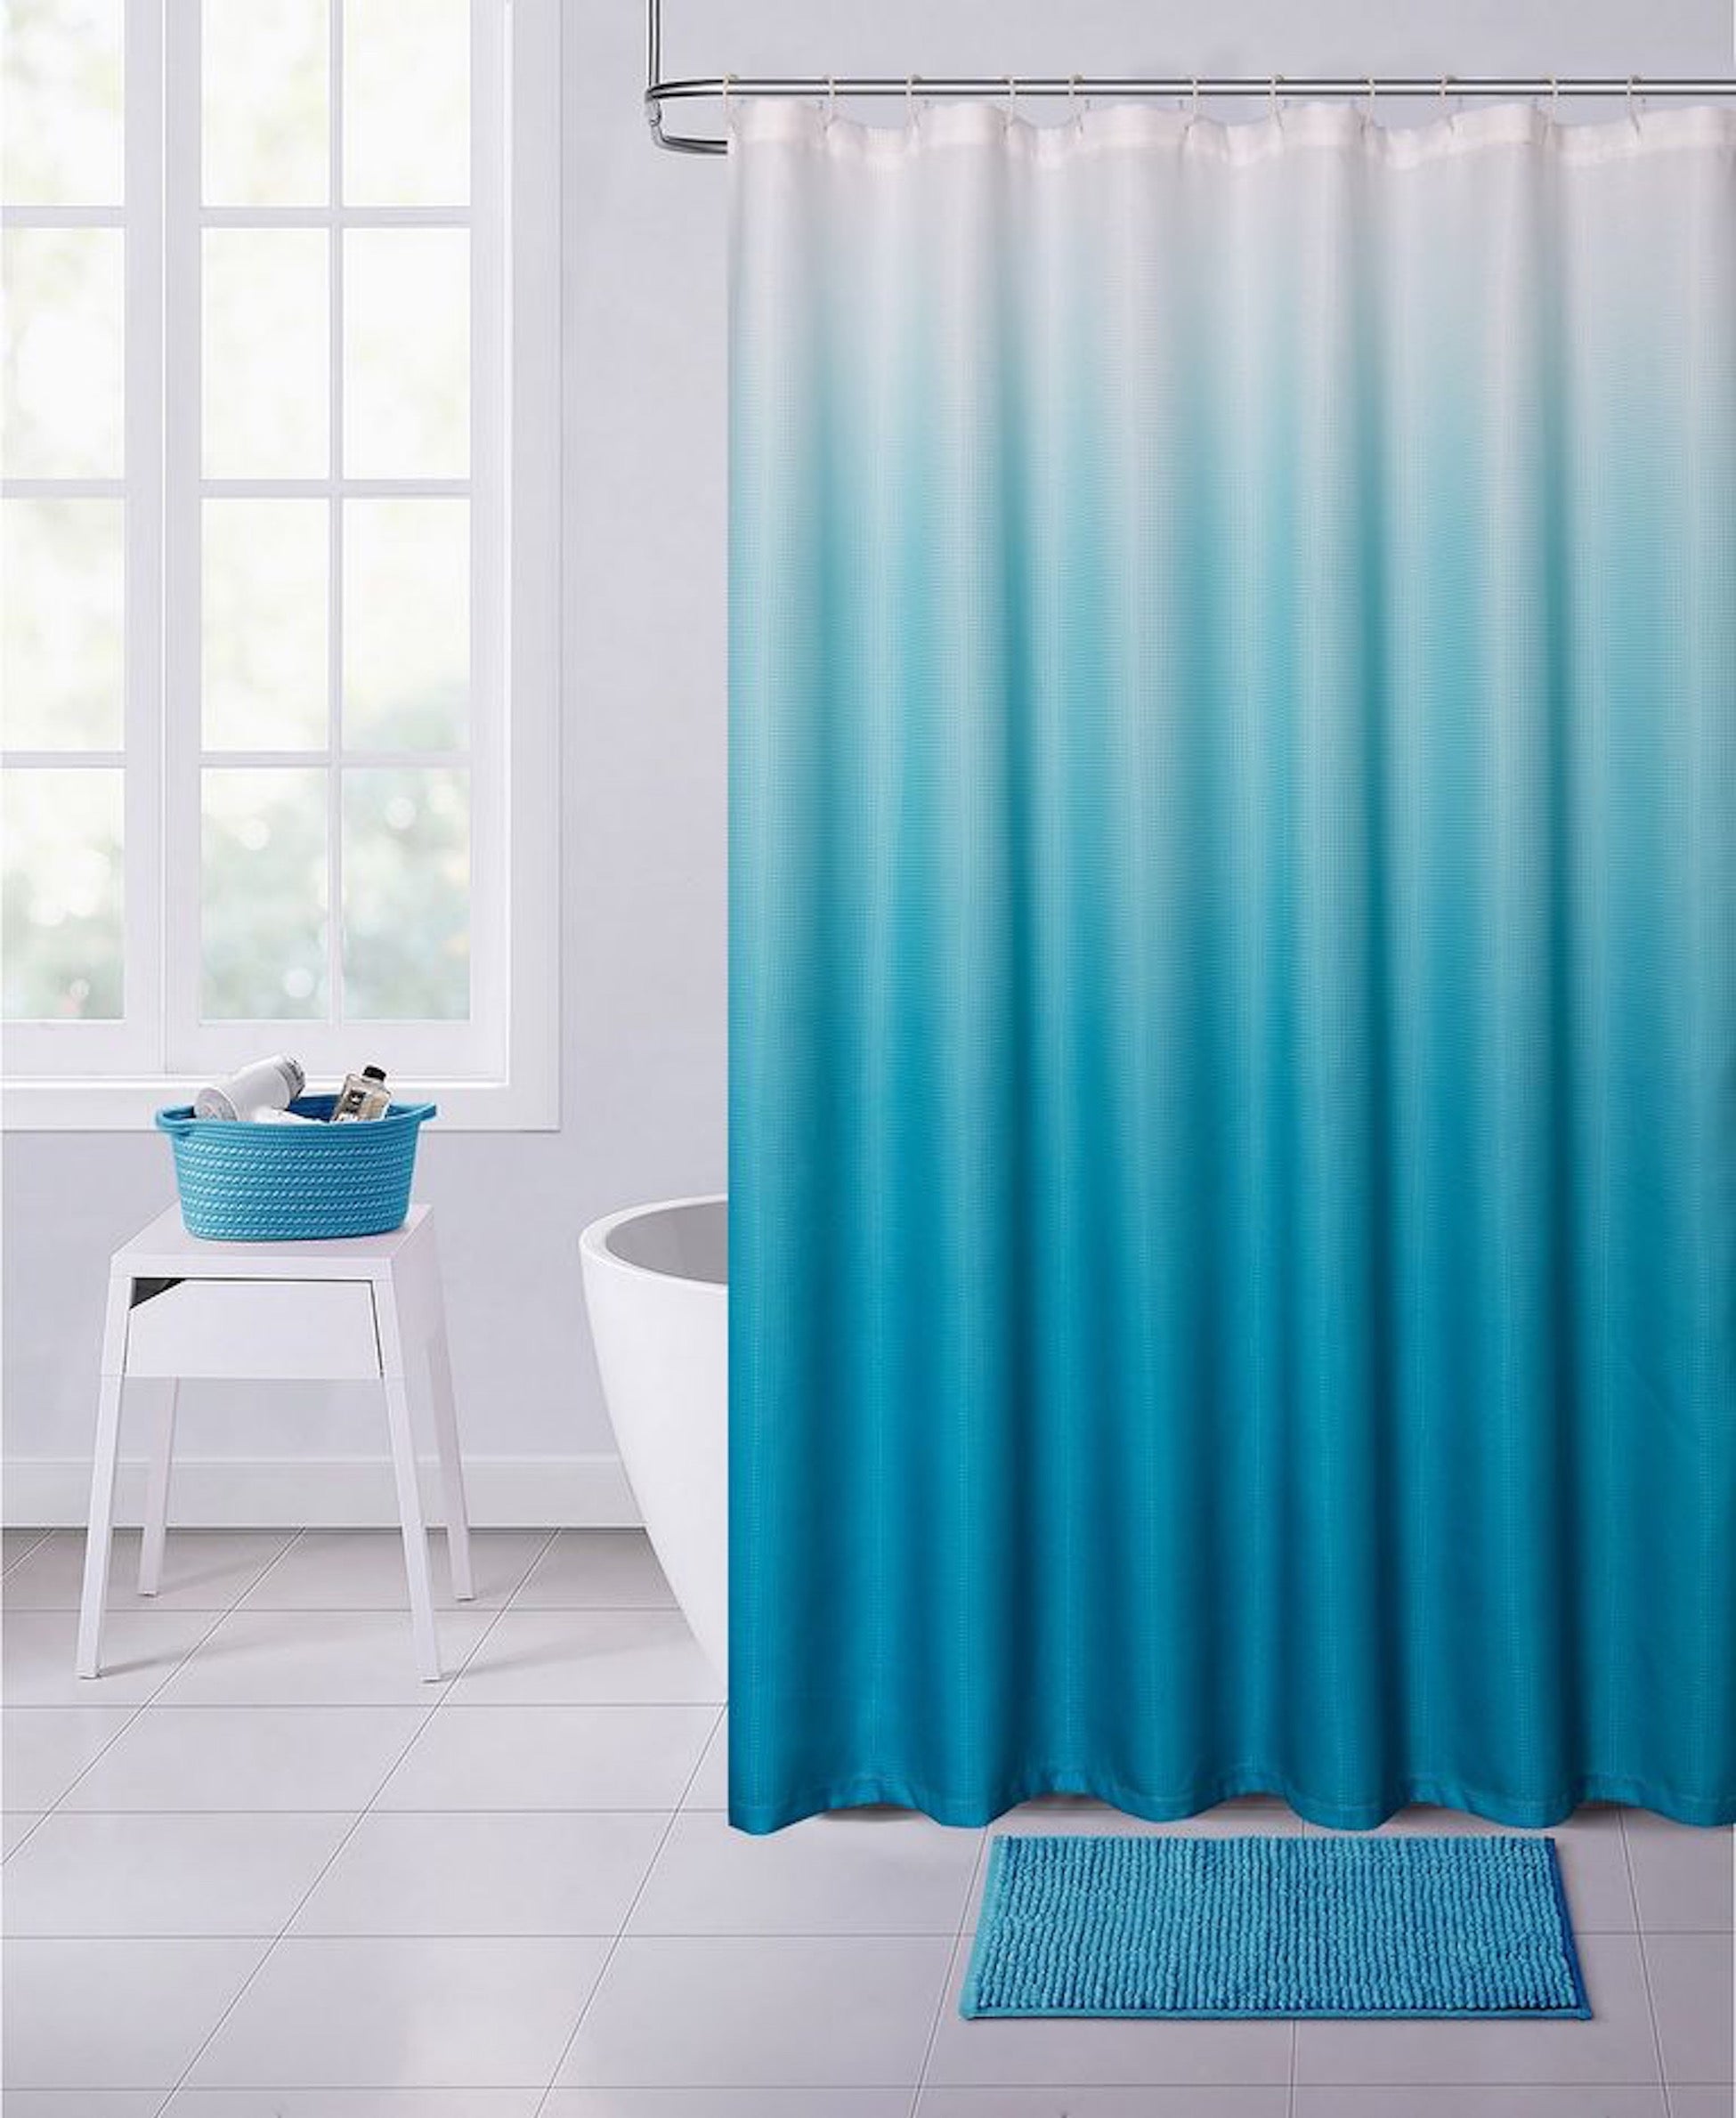 Dainty Home Printed Waffle 3D Textured Waffle Weave Textured Ombre Designed Fabric Shower Curtain